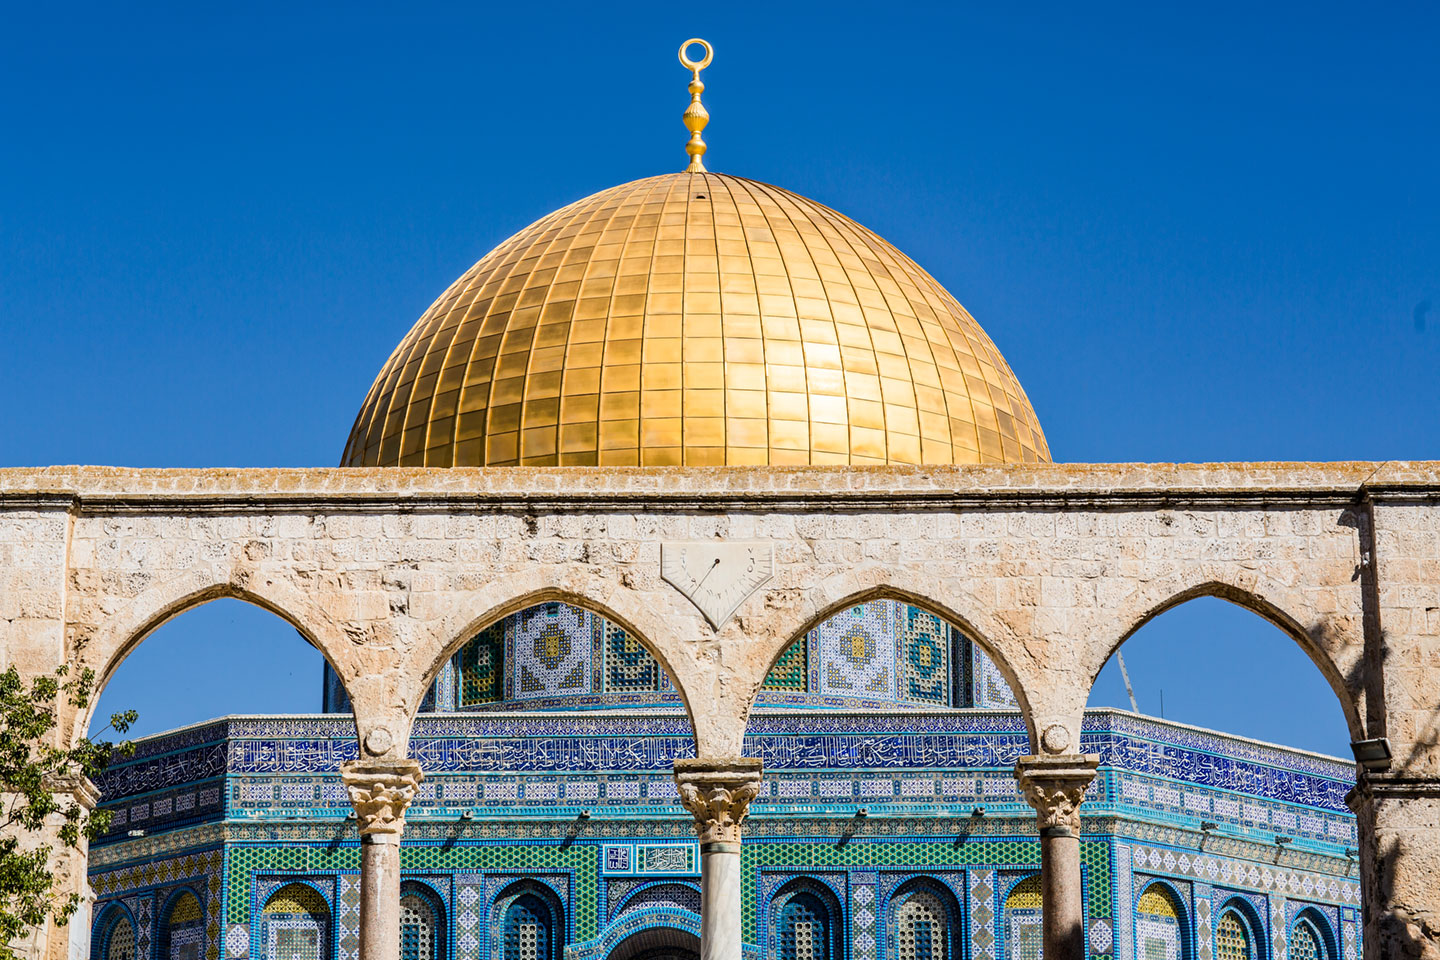 Dome of the rock in Jerusalem, Israel